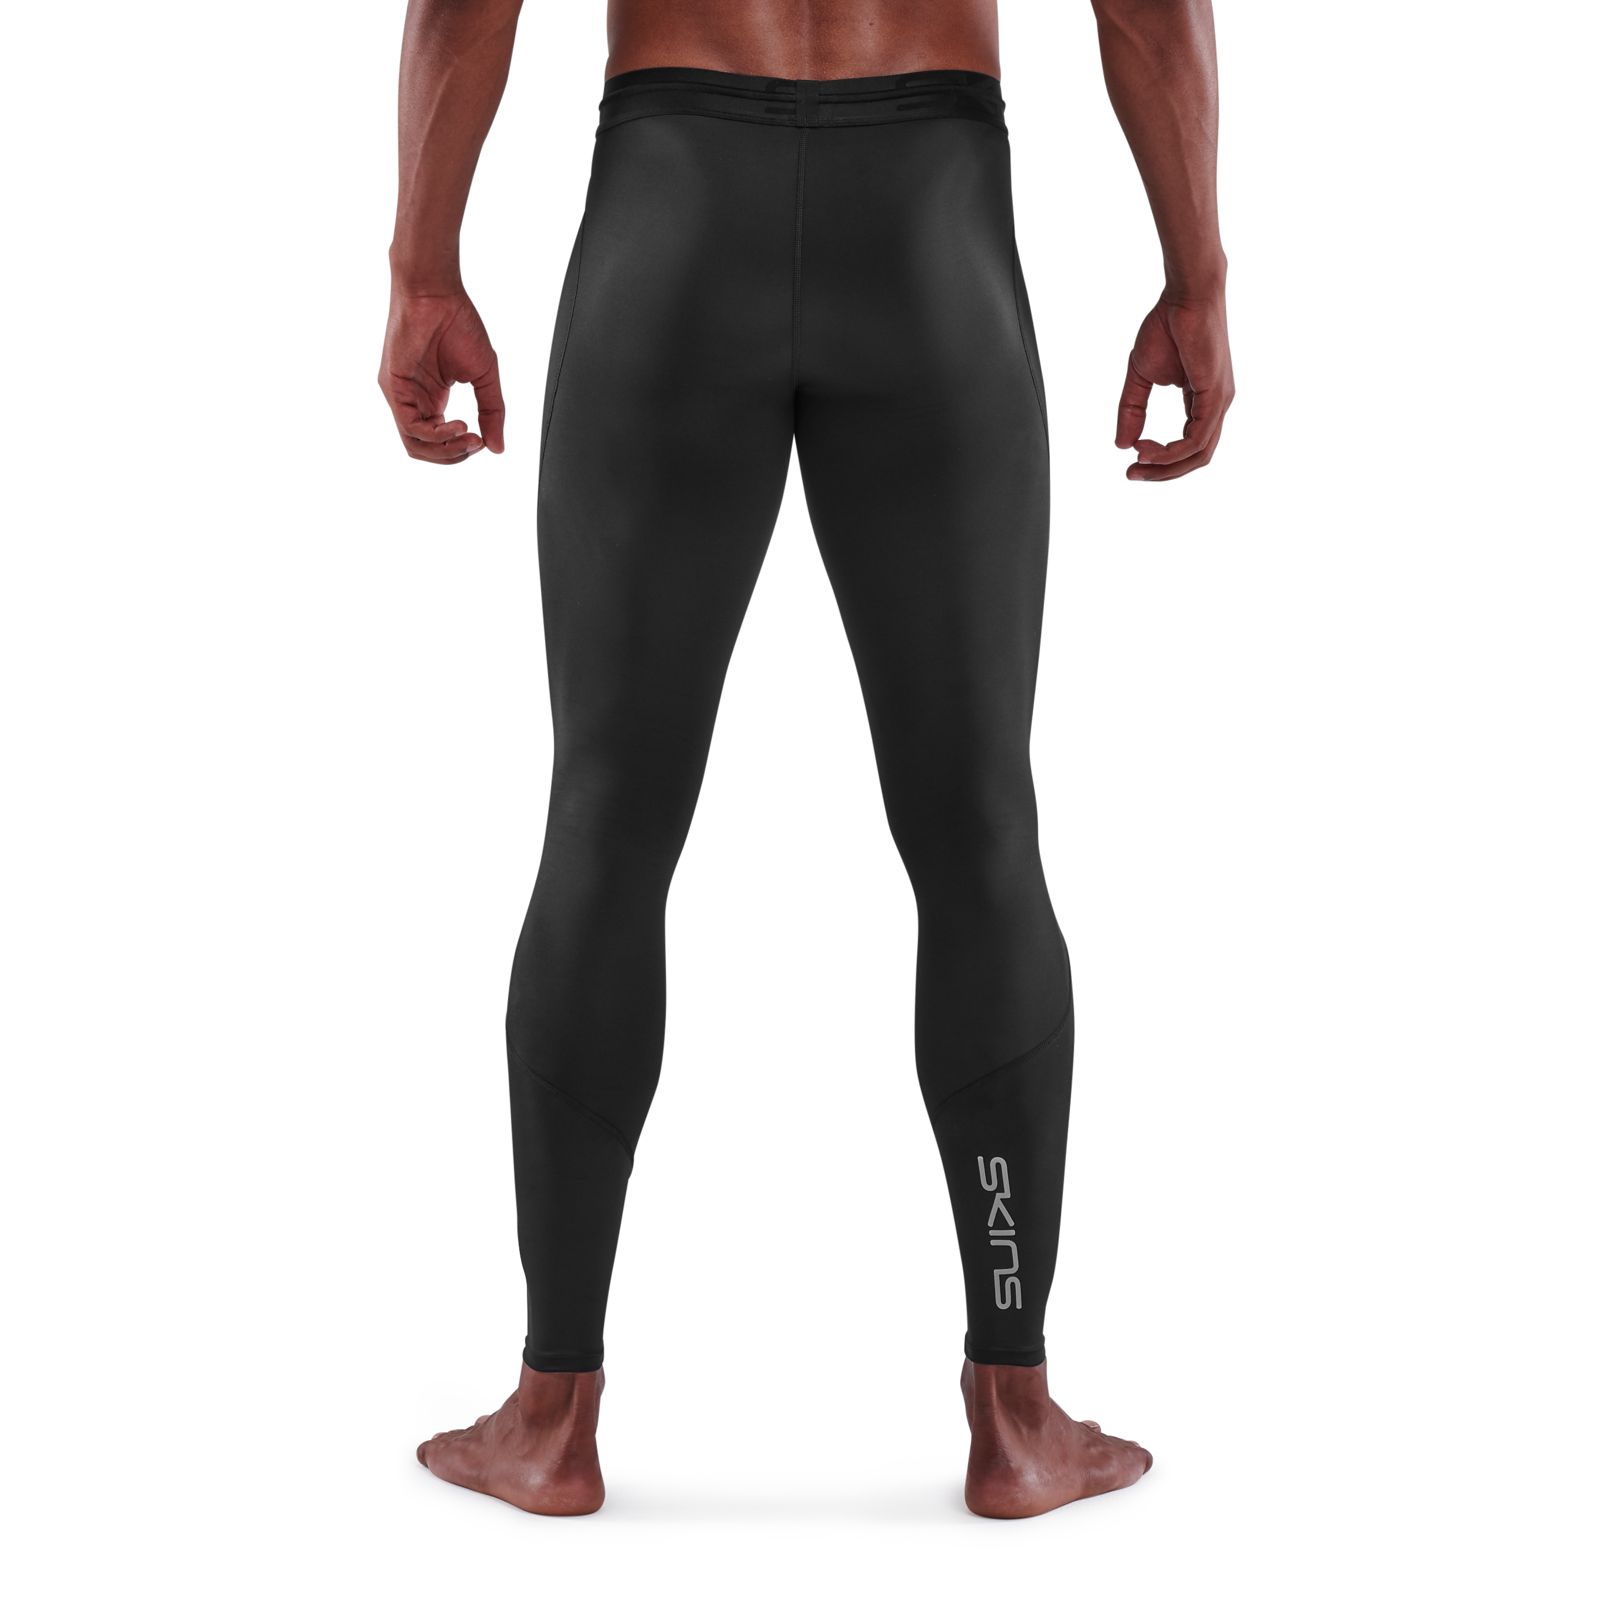 SKINS Compression Series-3 Men's Long Tights Charcoal XL